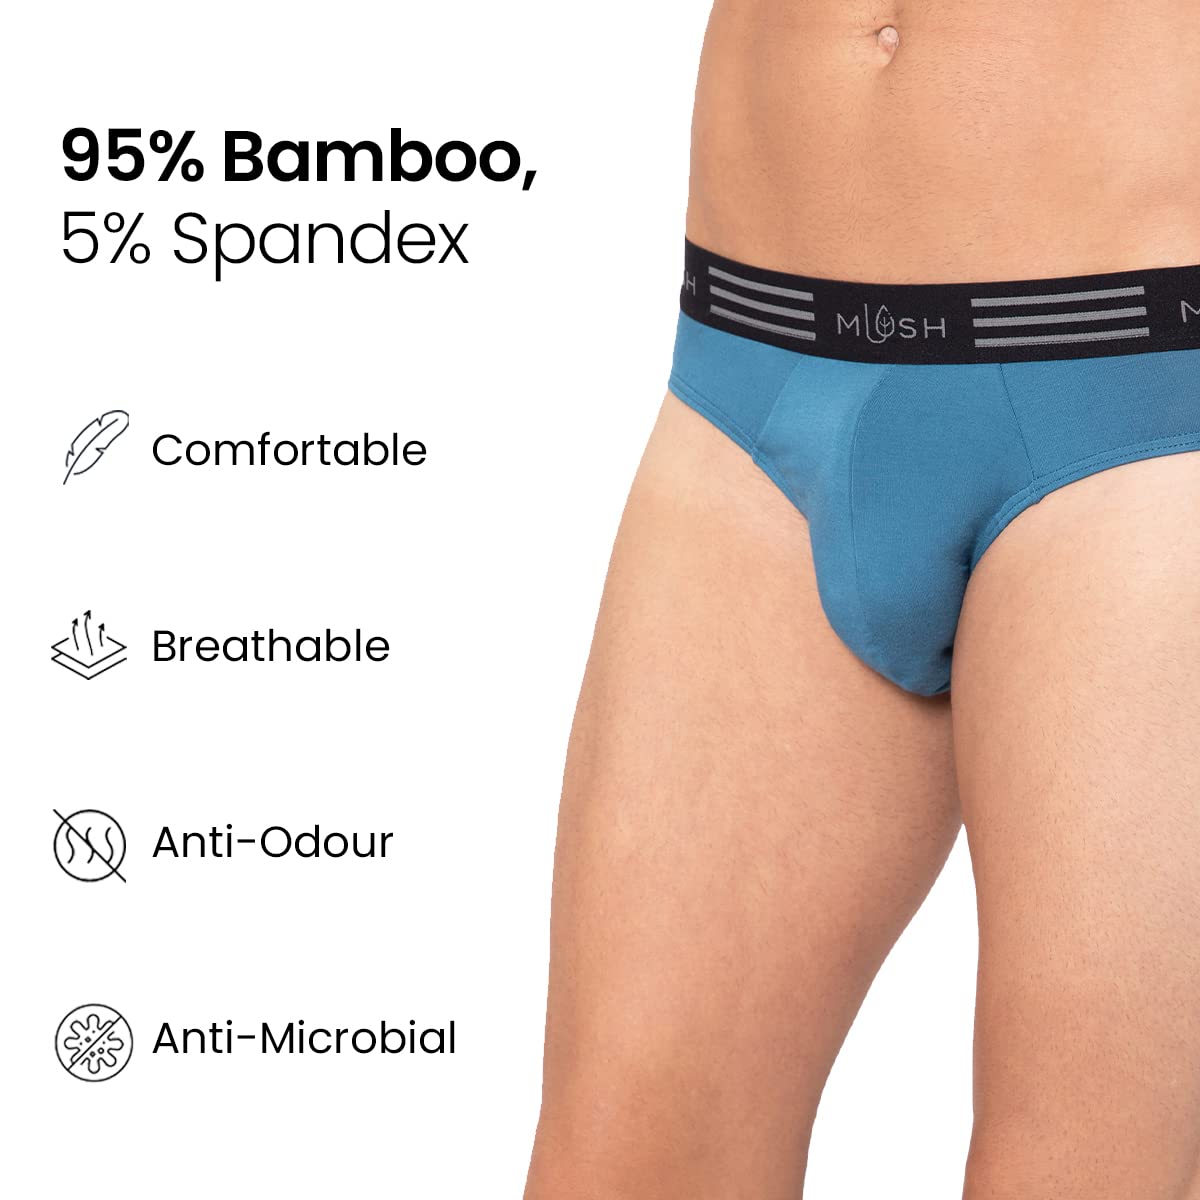 Mush Ultra Soft, Breathable, Feather Light Men's Bamboo Brief || Naturally Anti-Odor and Anti-Microbial Bamboo Innerwear Pack of 2 (S, Blue and Black)